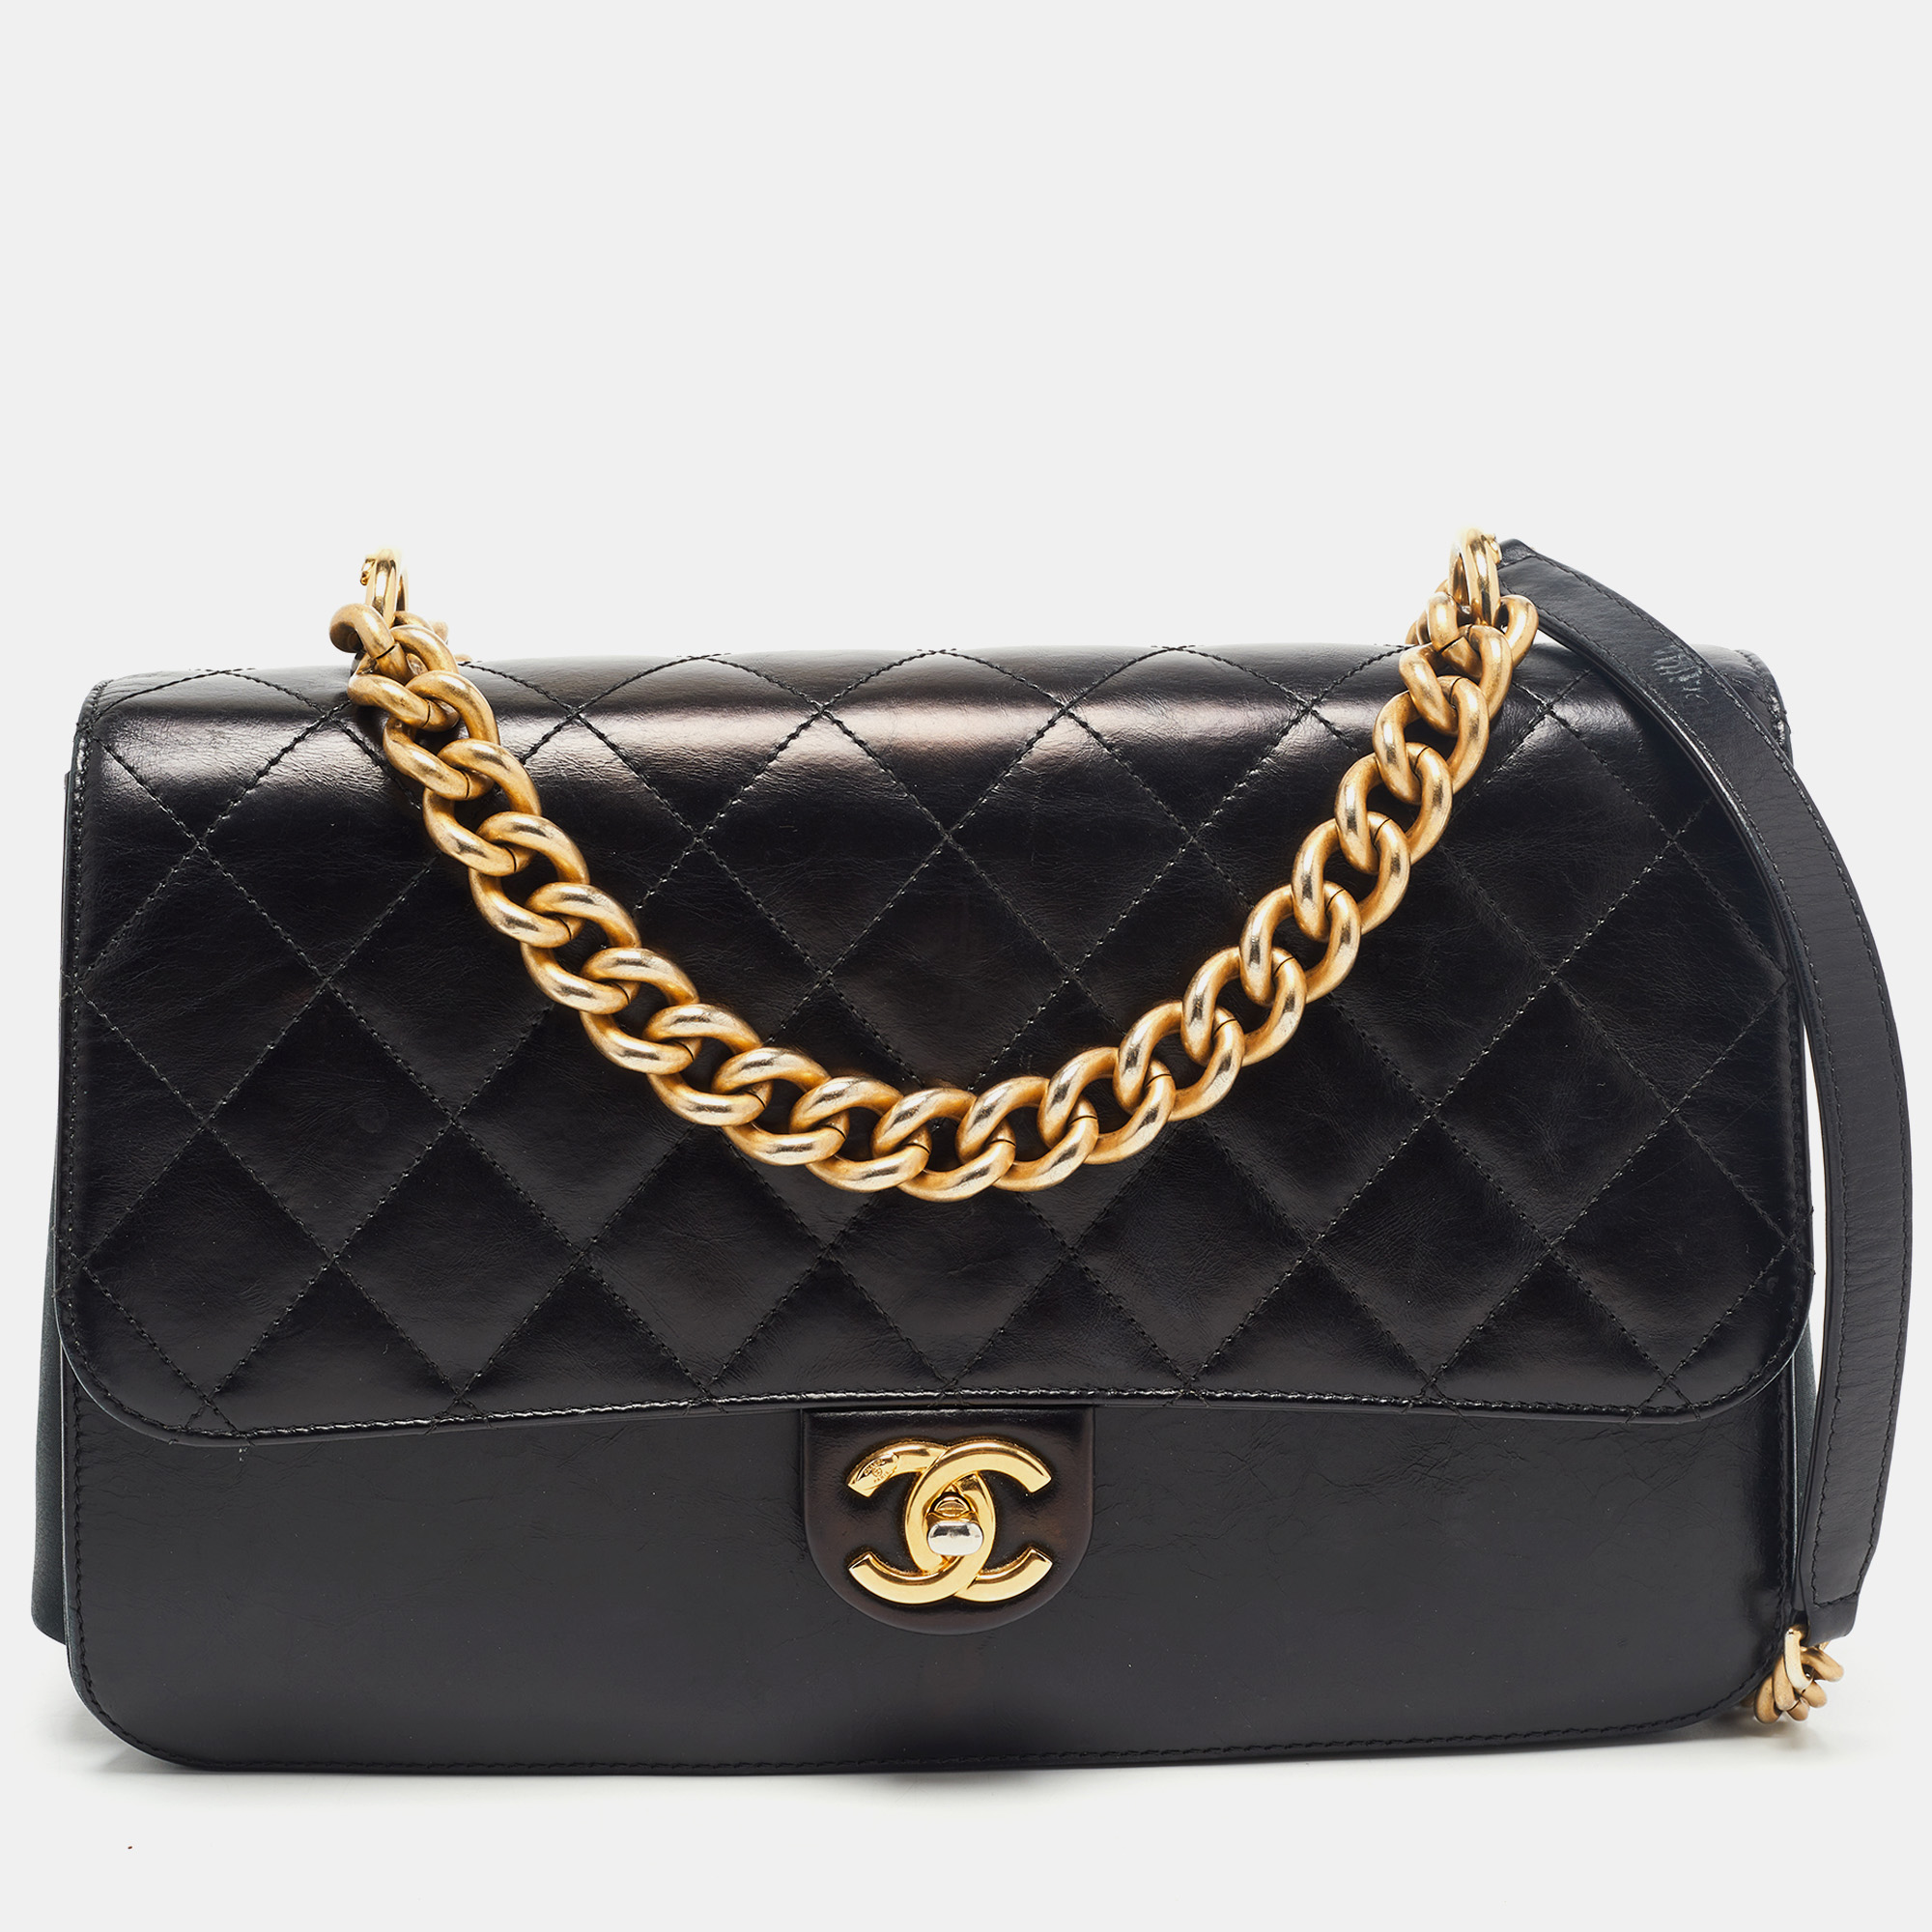 Pre-owned Chanel Black Quilted Leather Straight Line Flap Bag